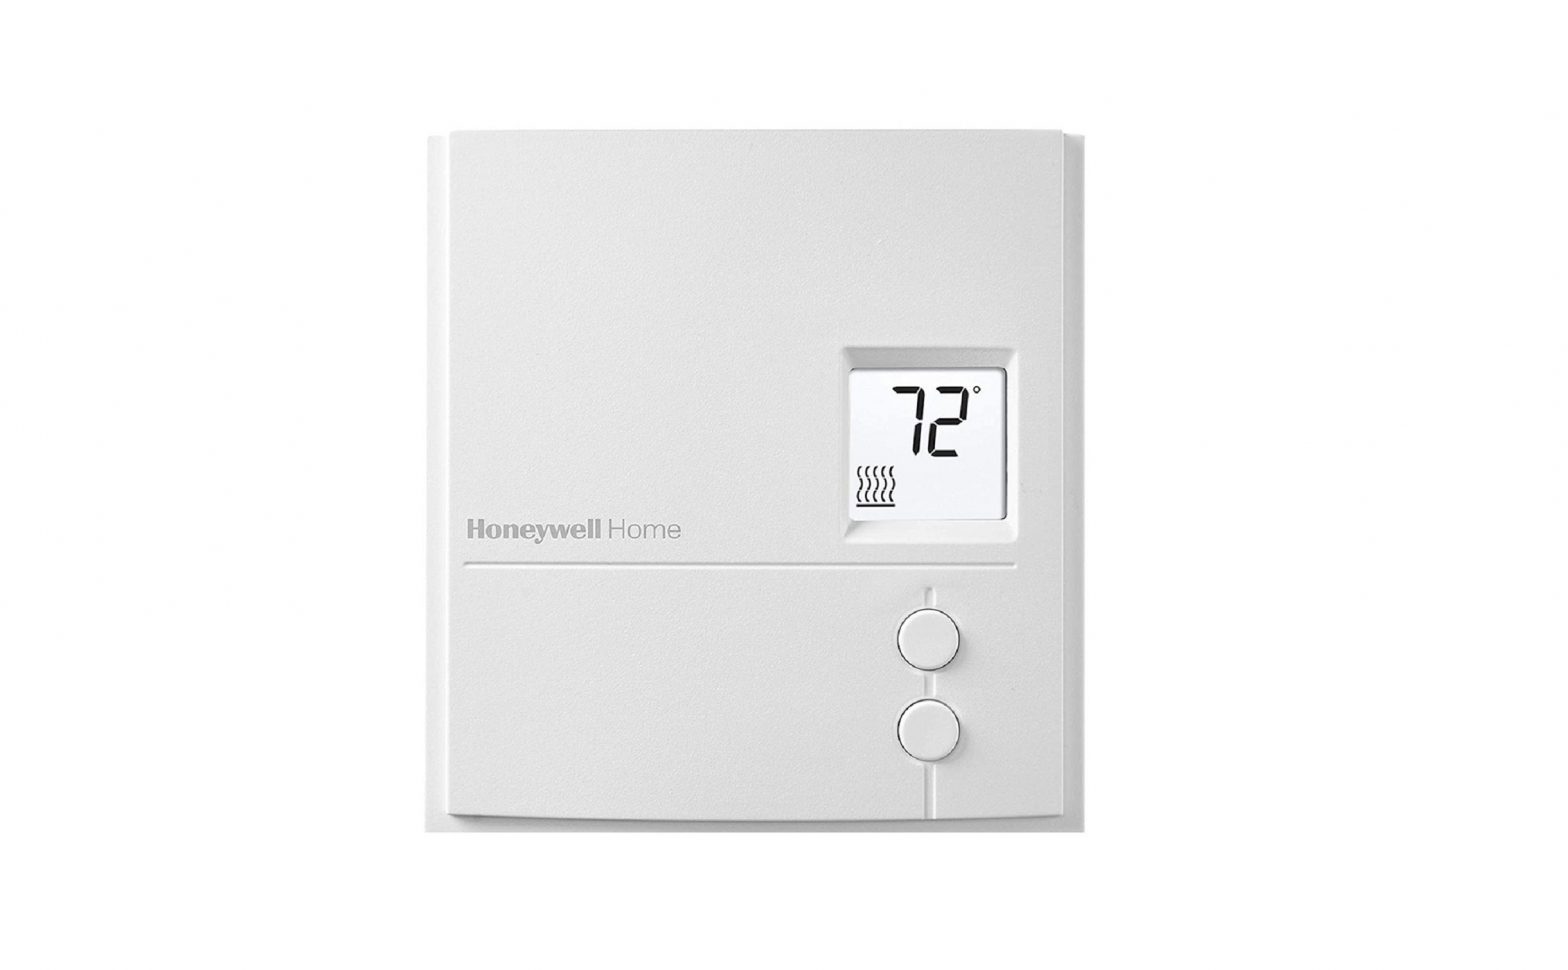 Honeywell Home RLV3150 Electronic Thermostat Installation Guide